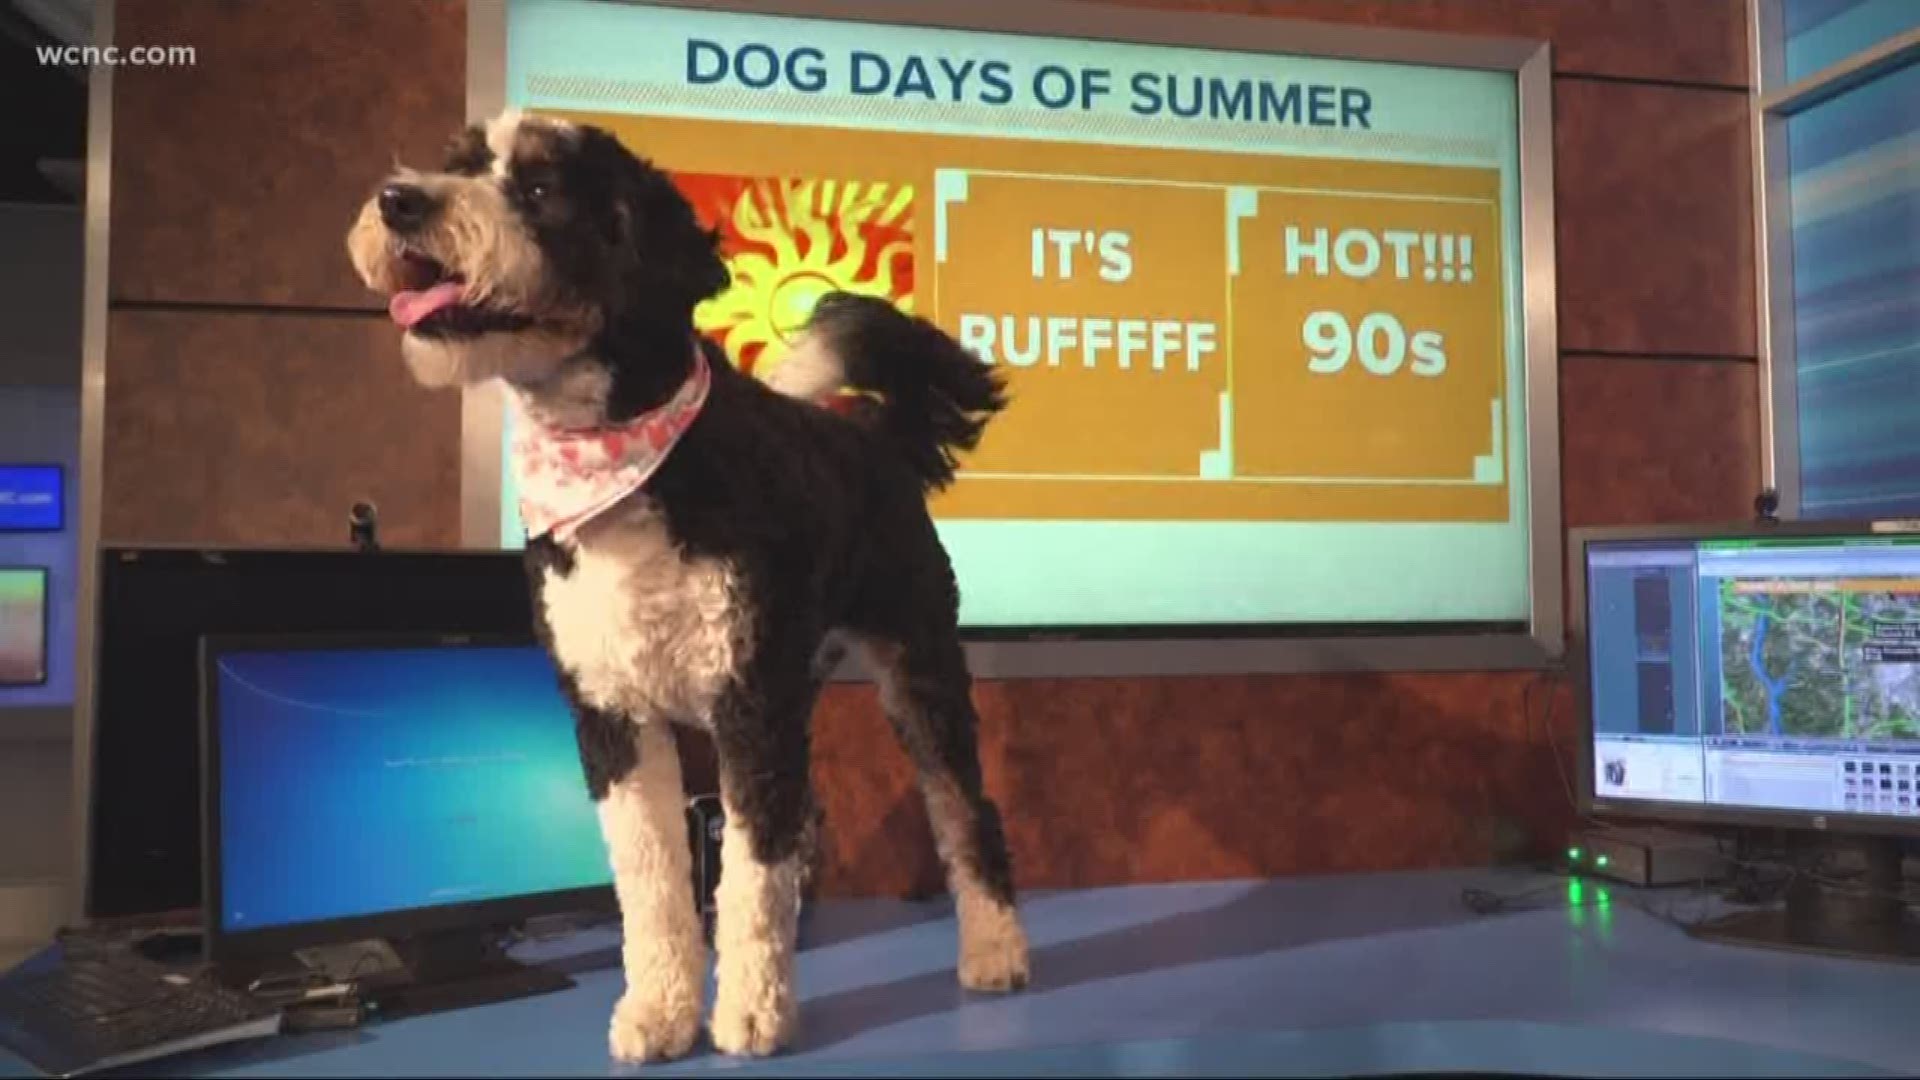 In case you missed it, some of the NBC Charlotte morning team's dogs took over the studio for Take Your Dog To Work Day!